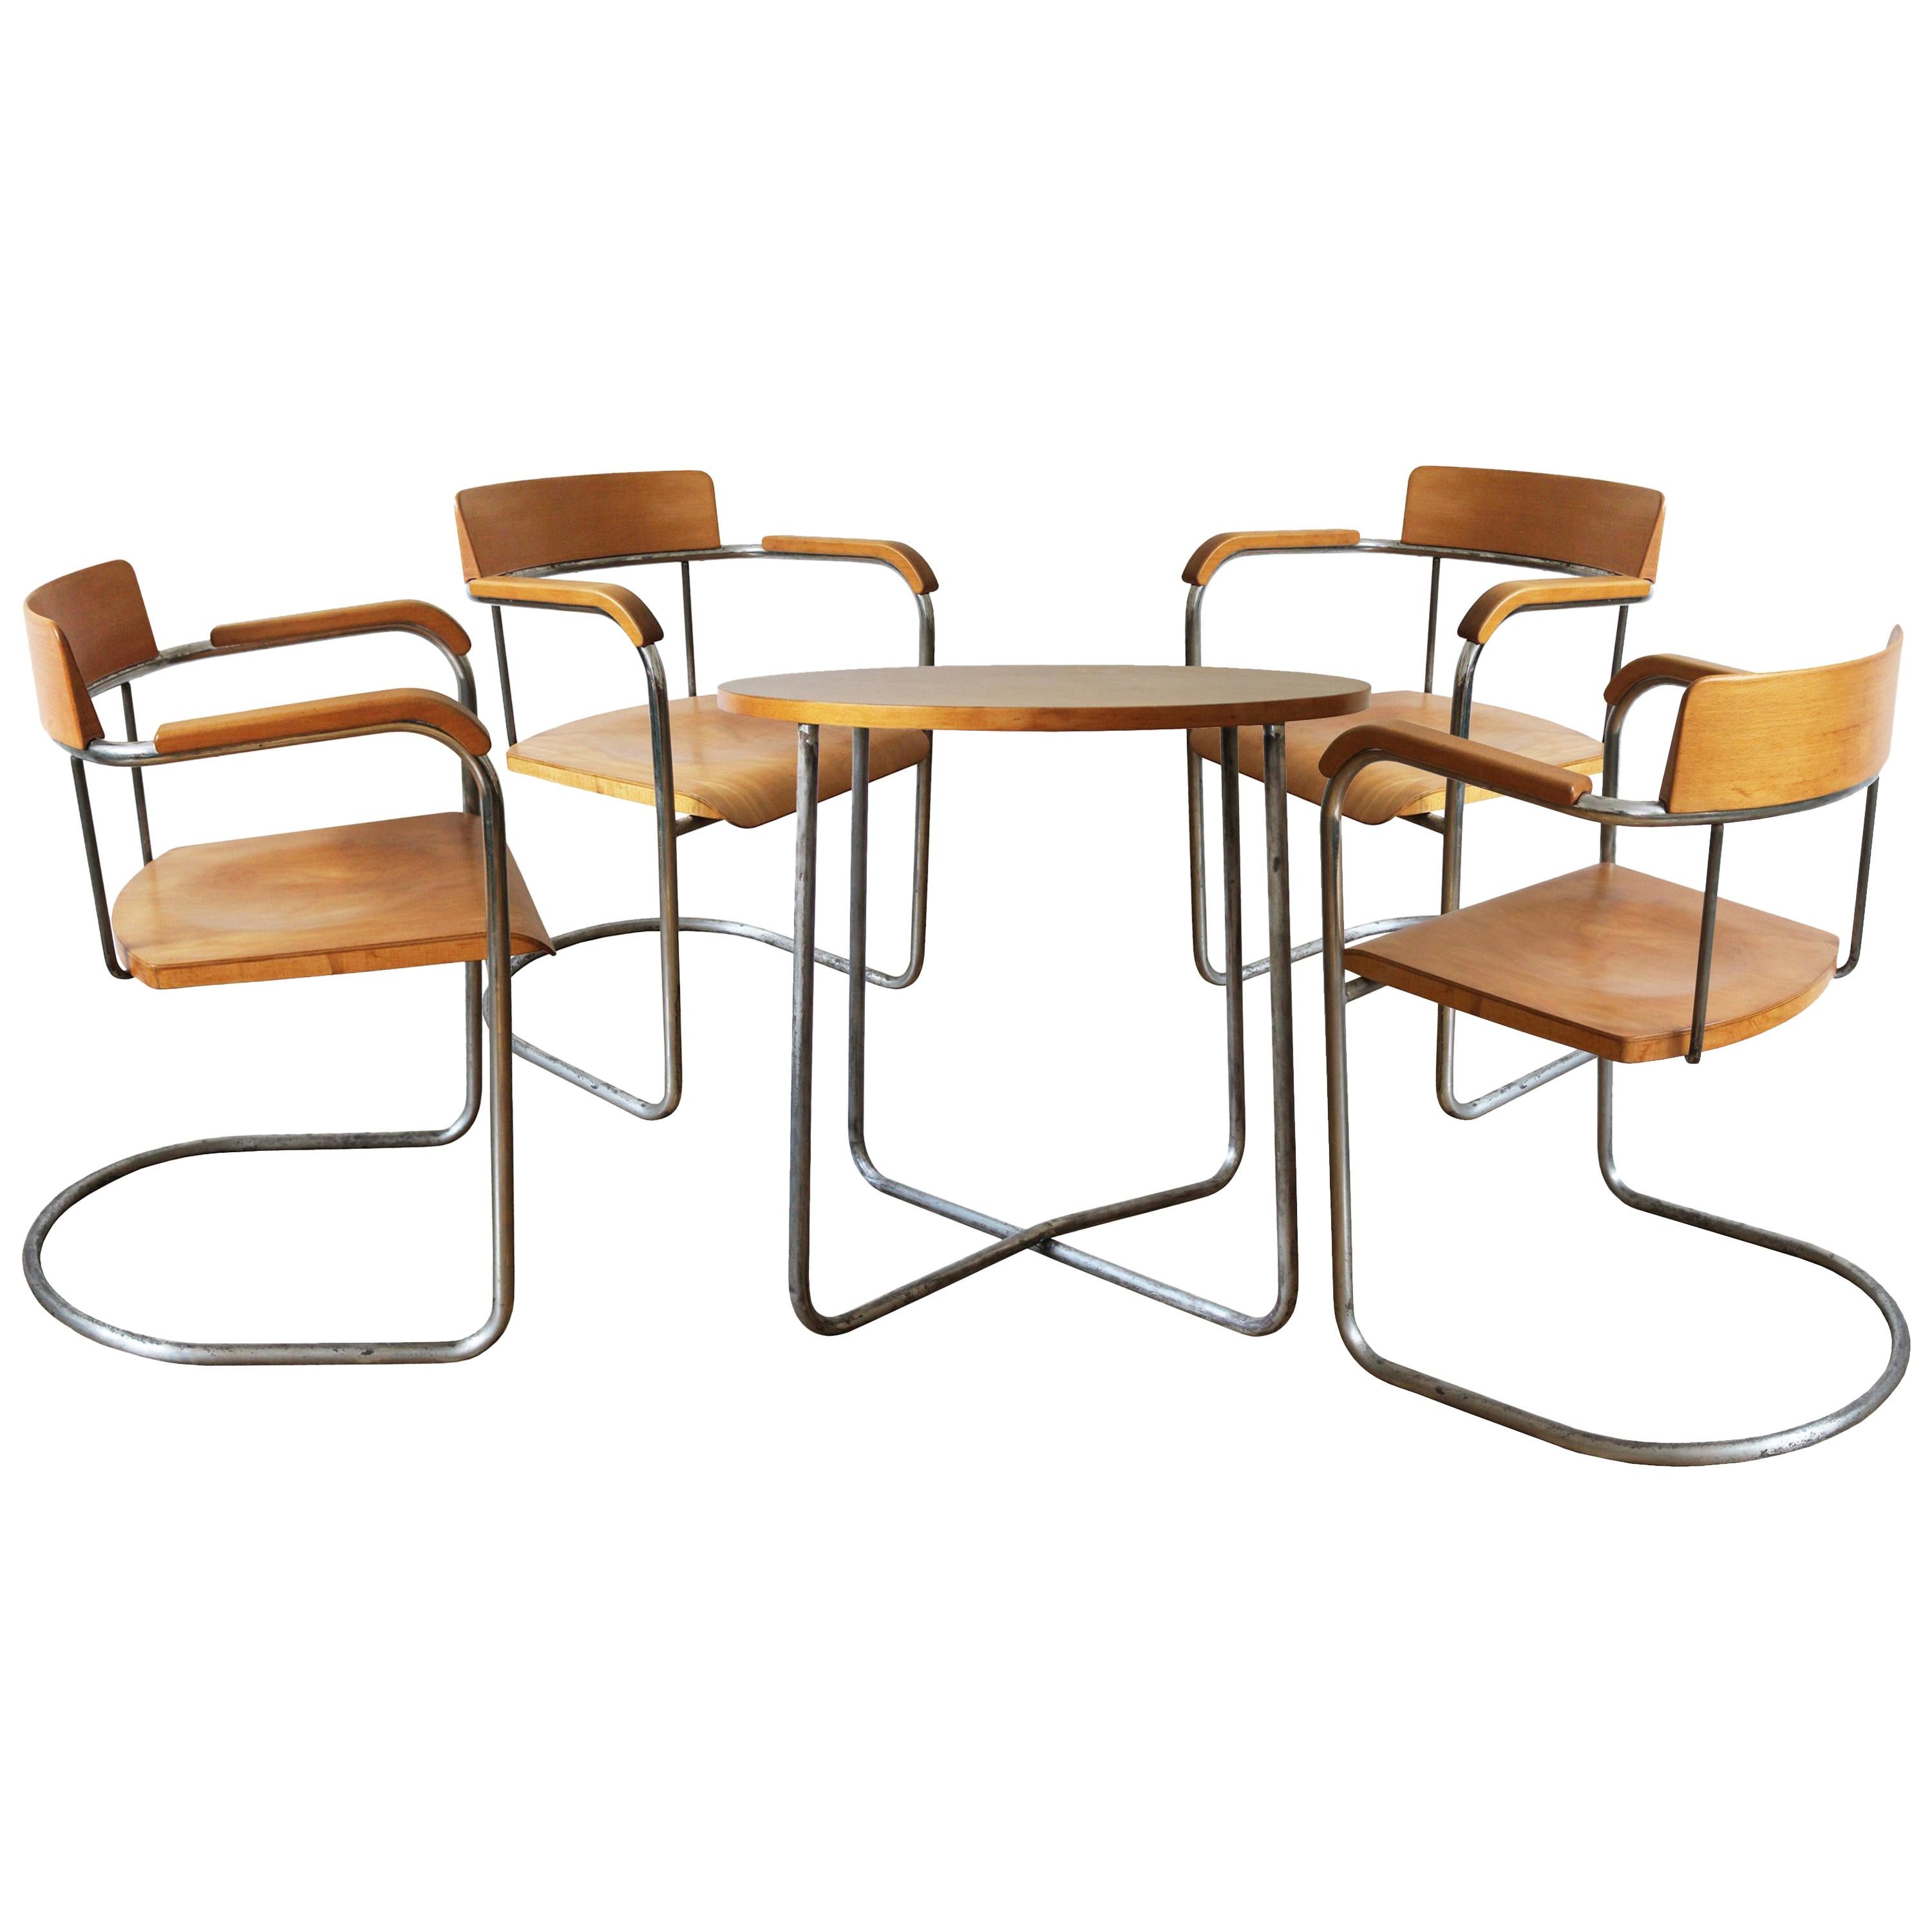 Modernist Dining Set of Four Chairs and Table by the Vichr Company For Sale